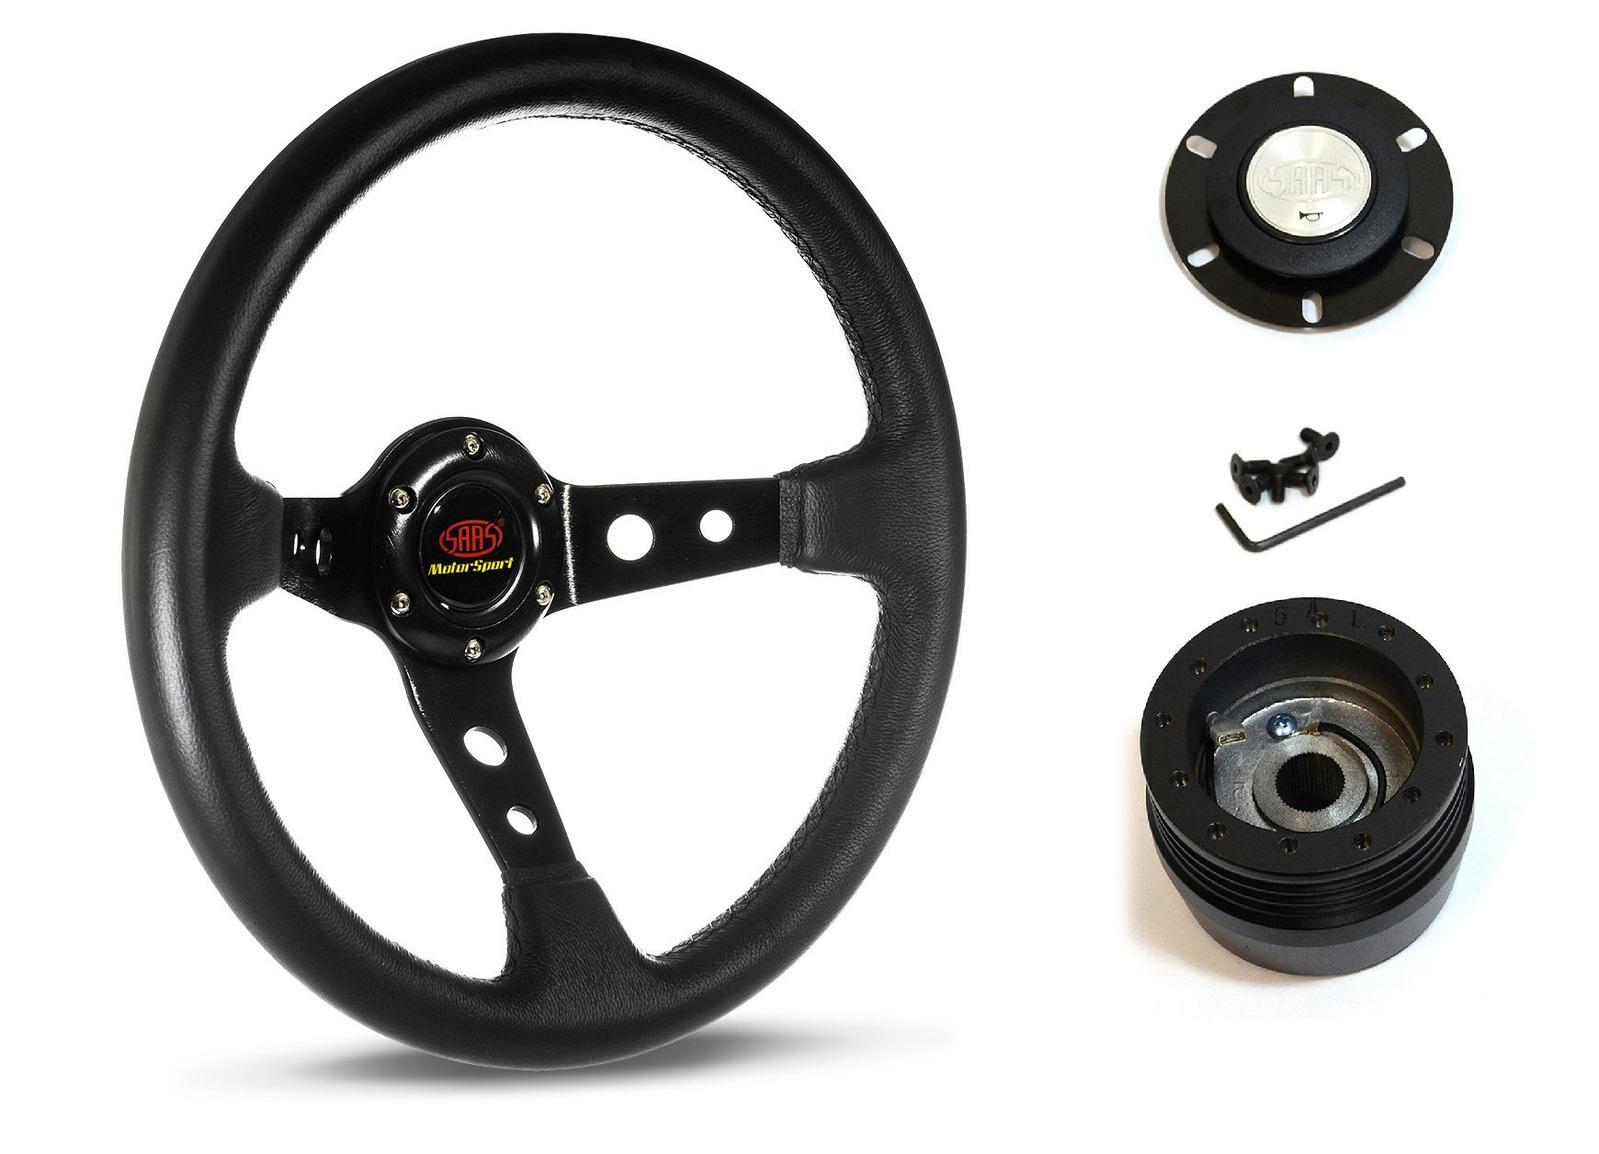 SAAS Steering Wheel Leather 14" ADR GT Deep Dish Black With Holes SWGT3 and SAAS boss kit for Ford LTD ZG ZH ZJ 1973-1981